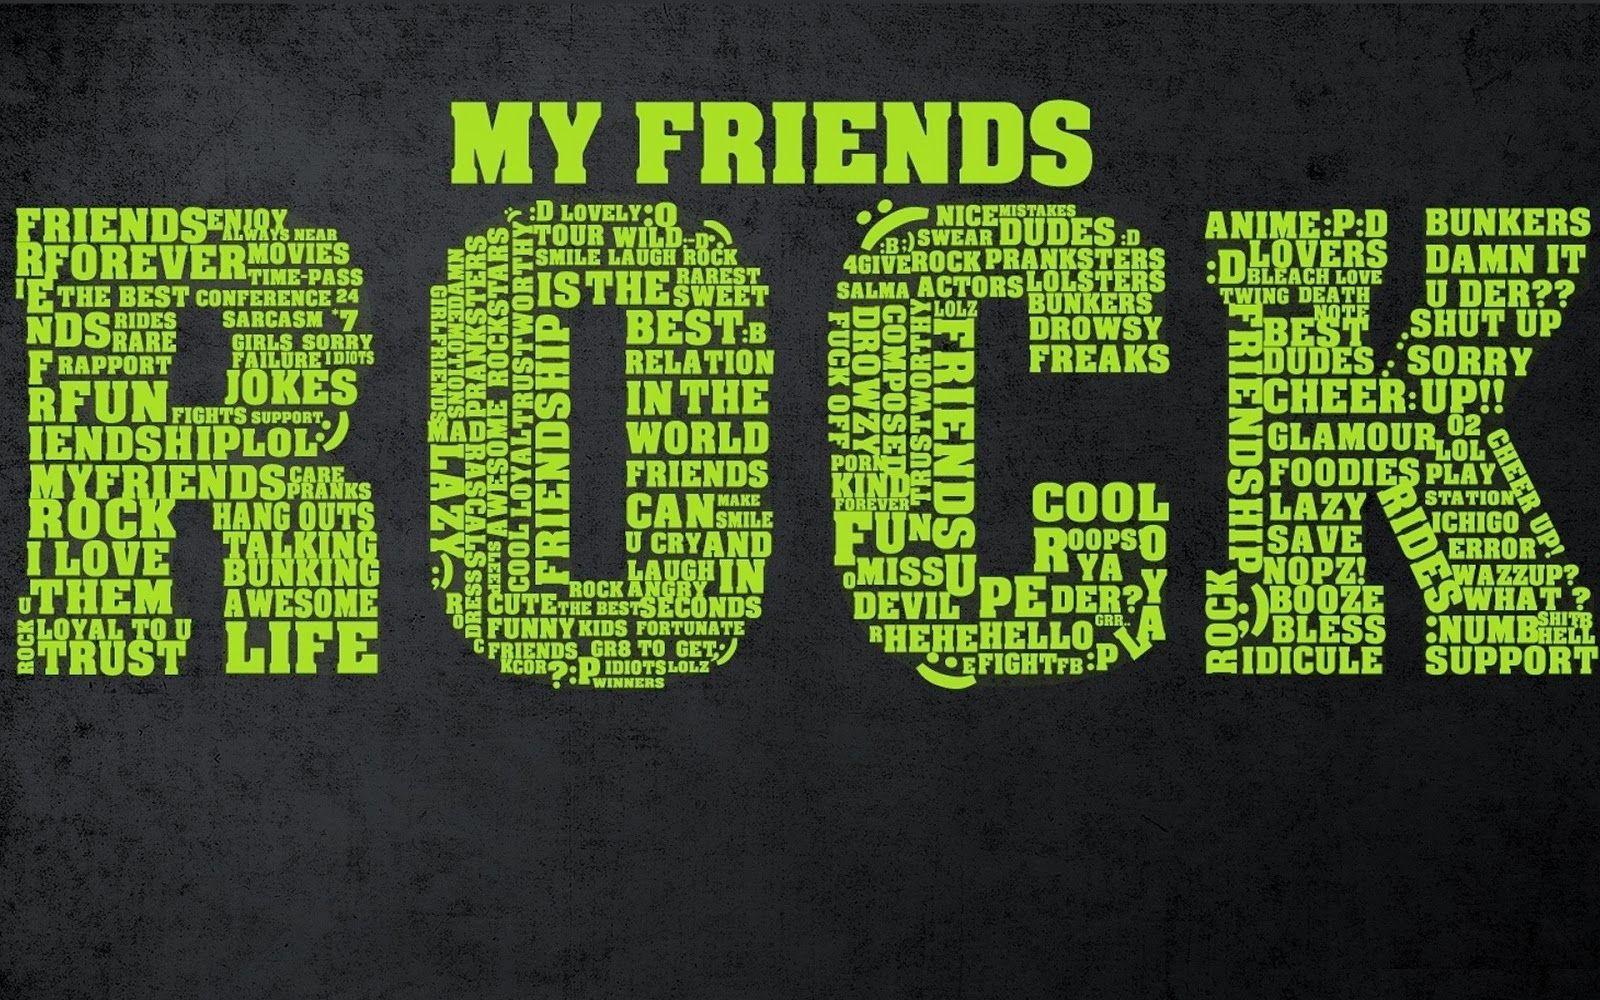 Happy Friendship day 2014 HD Wallpaper Banner Image For Free Download